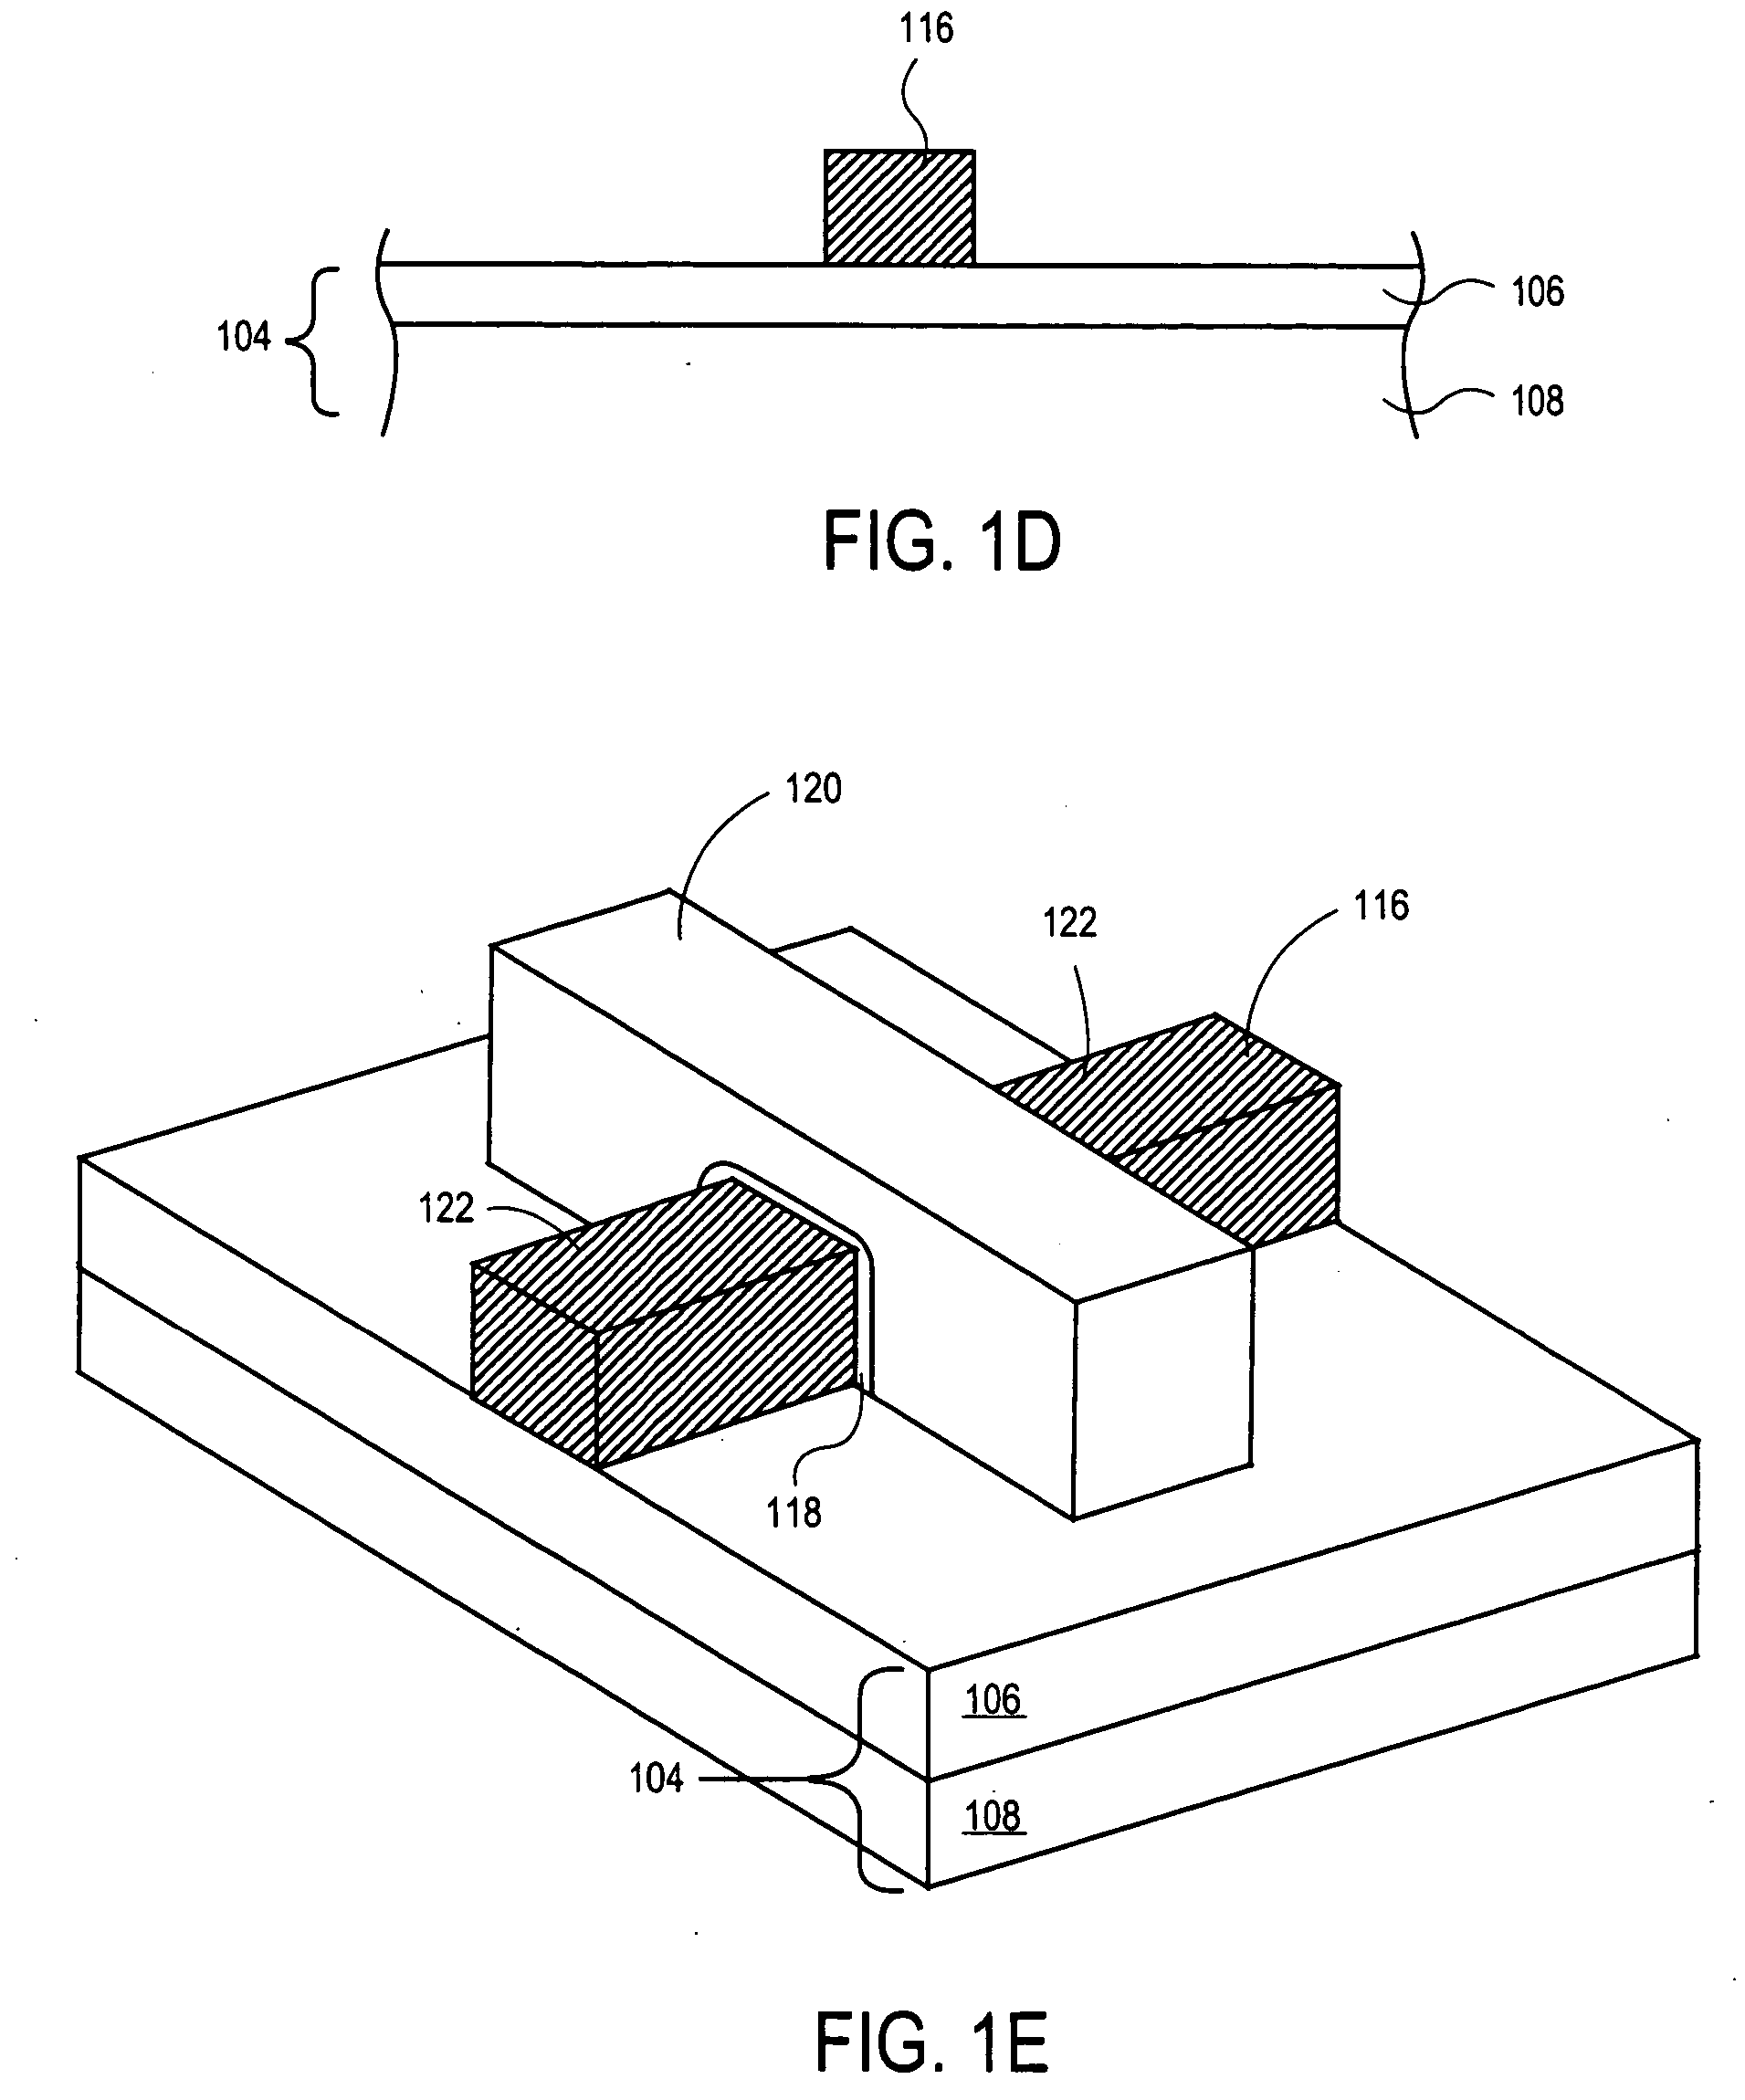 Method of varying etch selectivities of a film